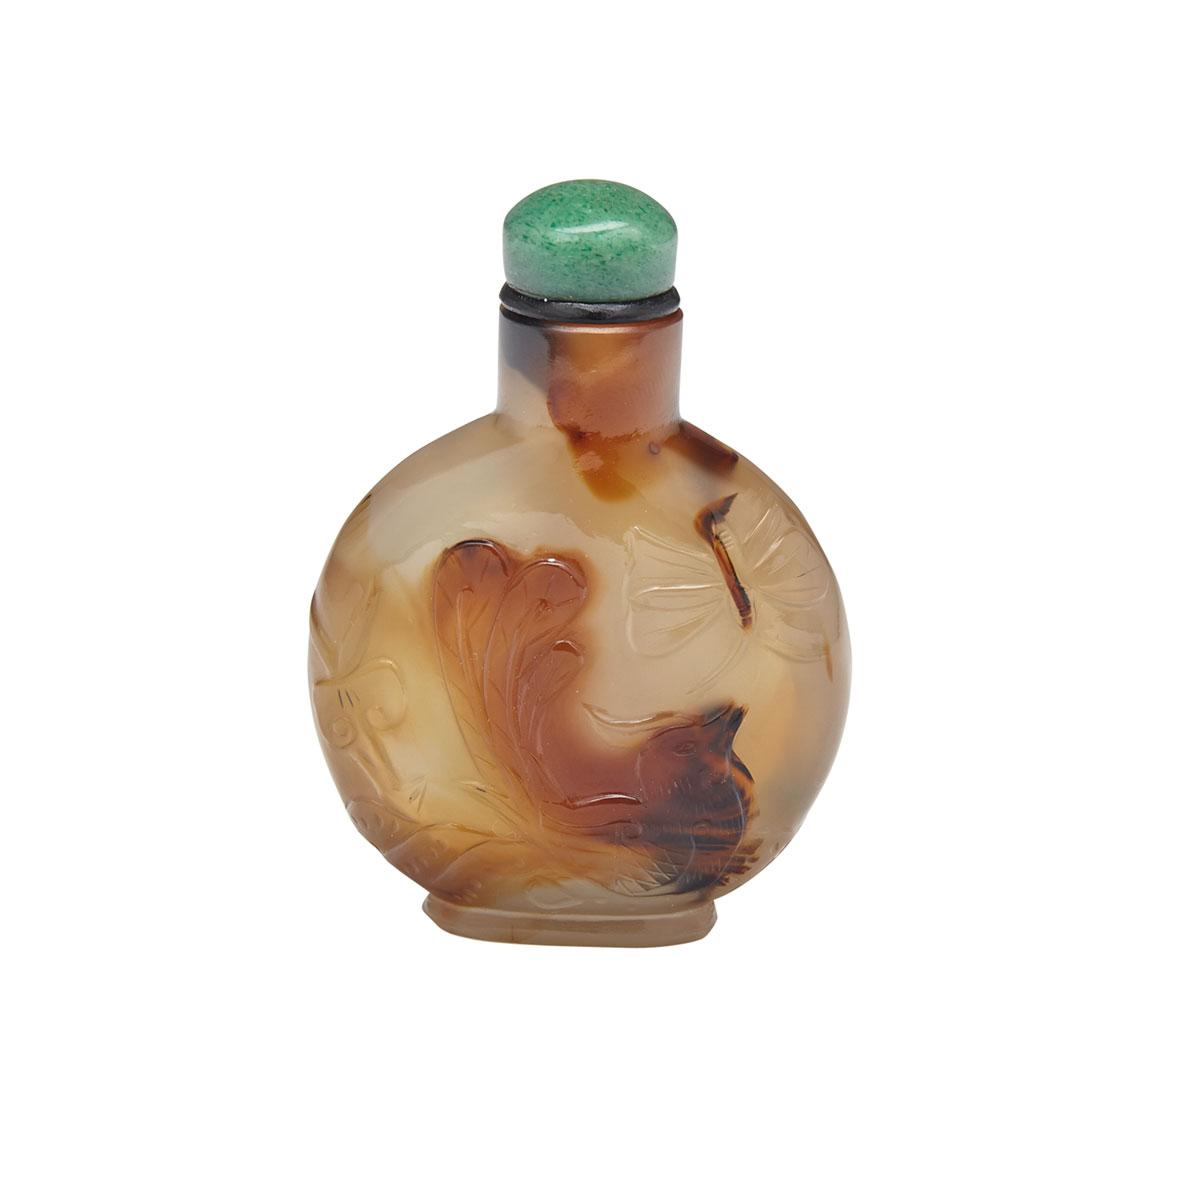 Agate ‘Bird and Cat’ Snuff Bottle, 19th Century